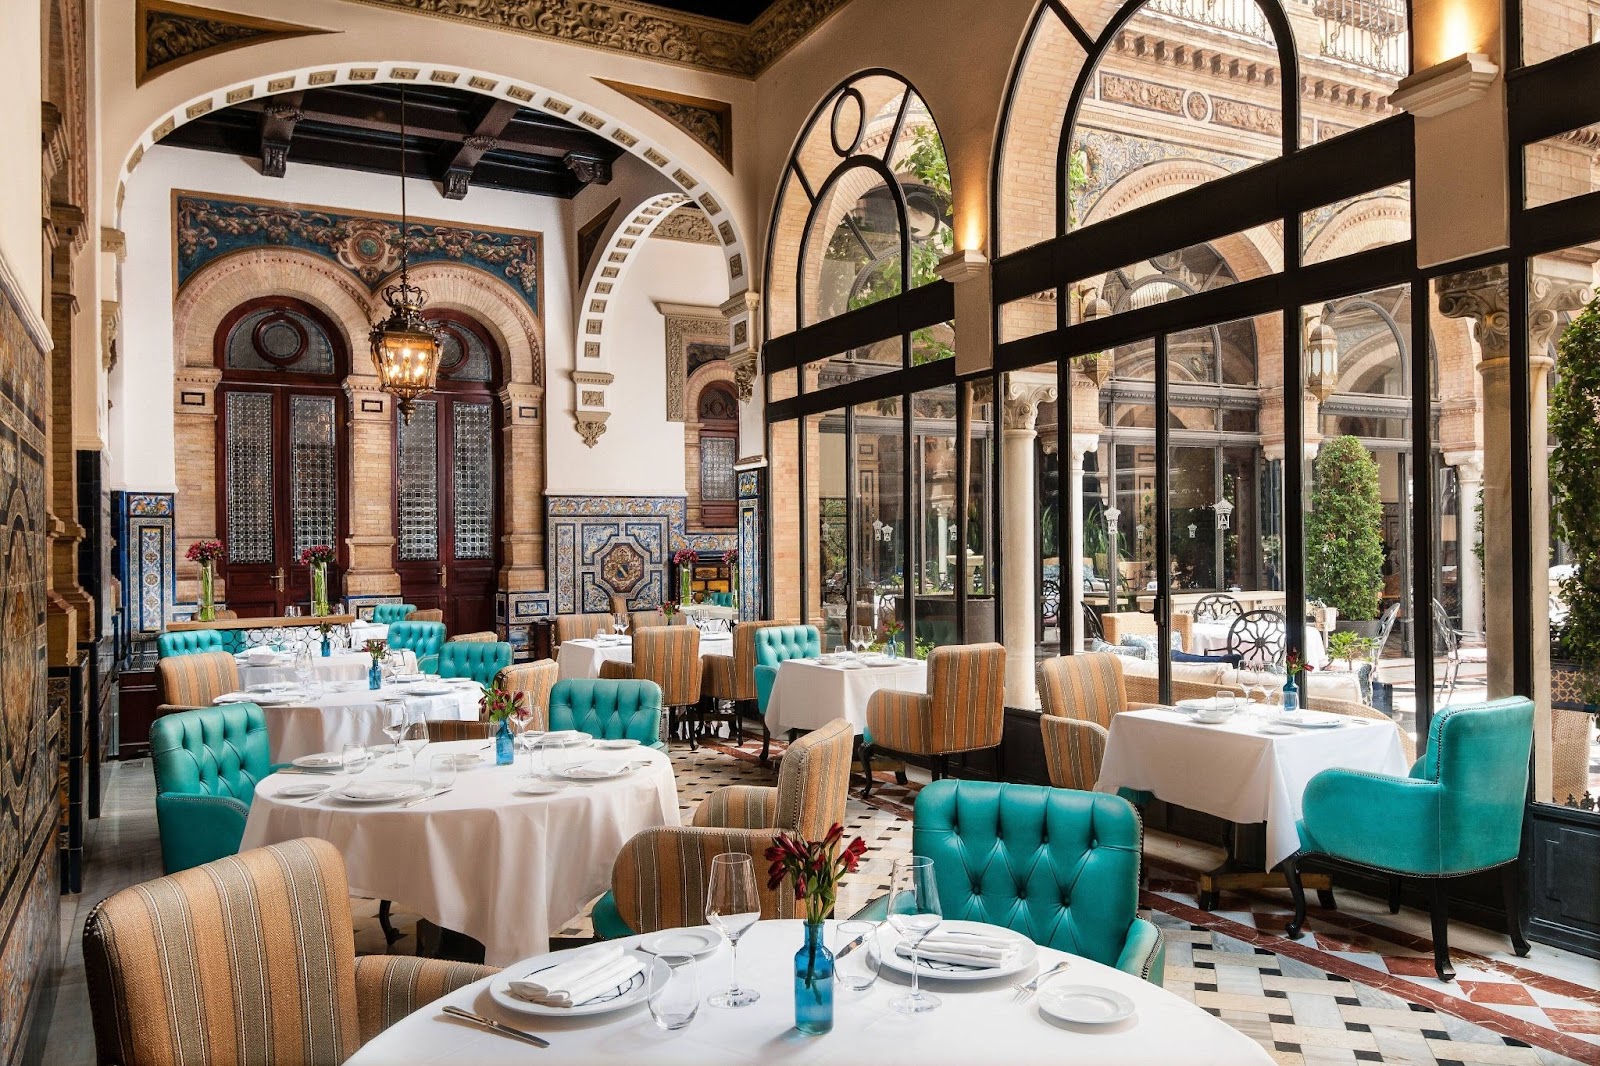 Hotel Alfonso XIII, a Luxury Collection Hotel, Seville